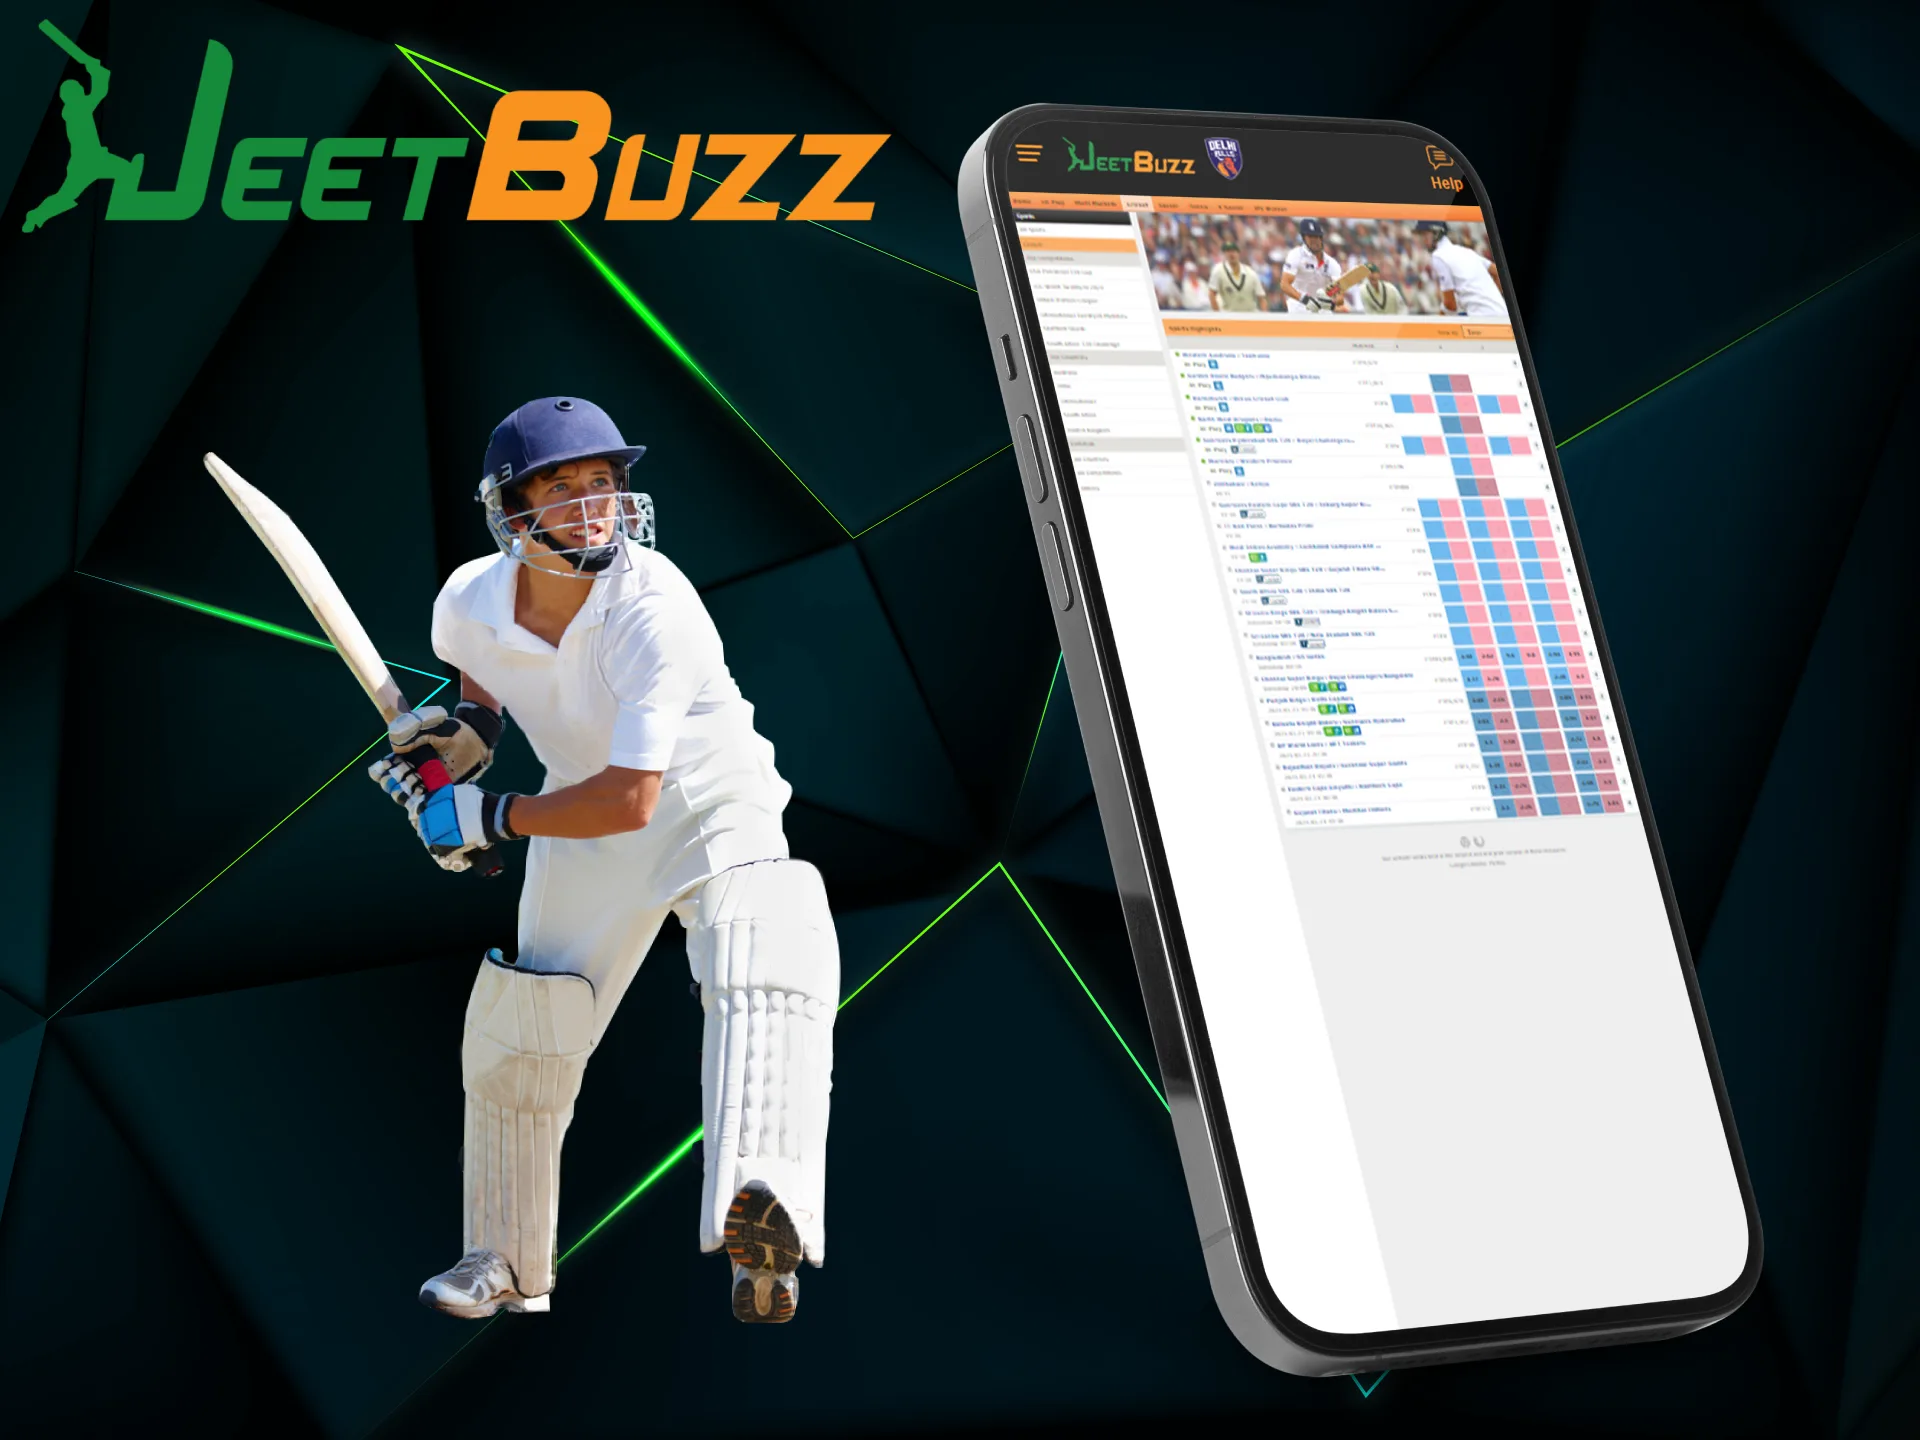 The JeetBuzz app allows you to bet on cricket quickly and conveniently.